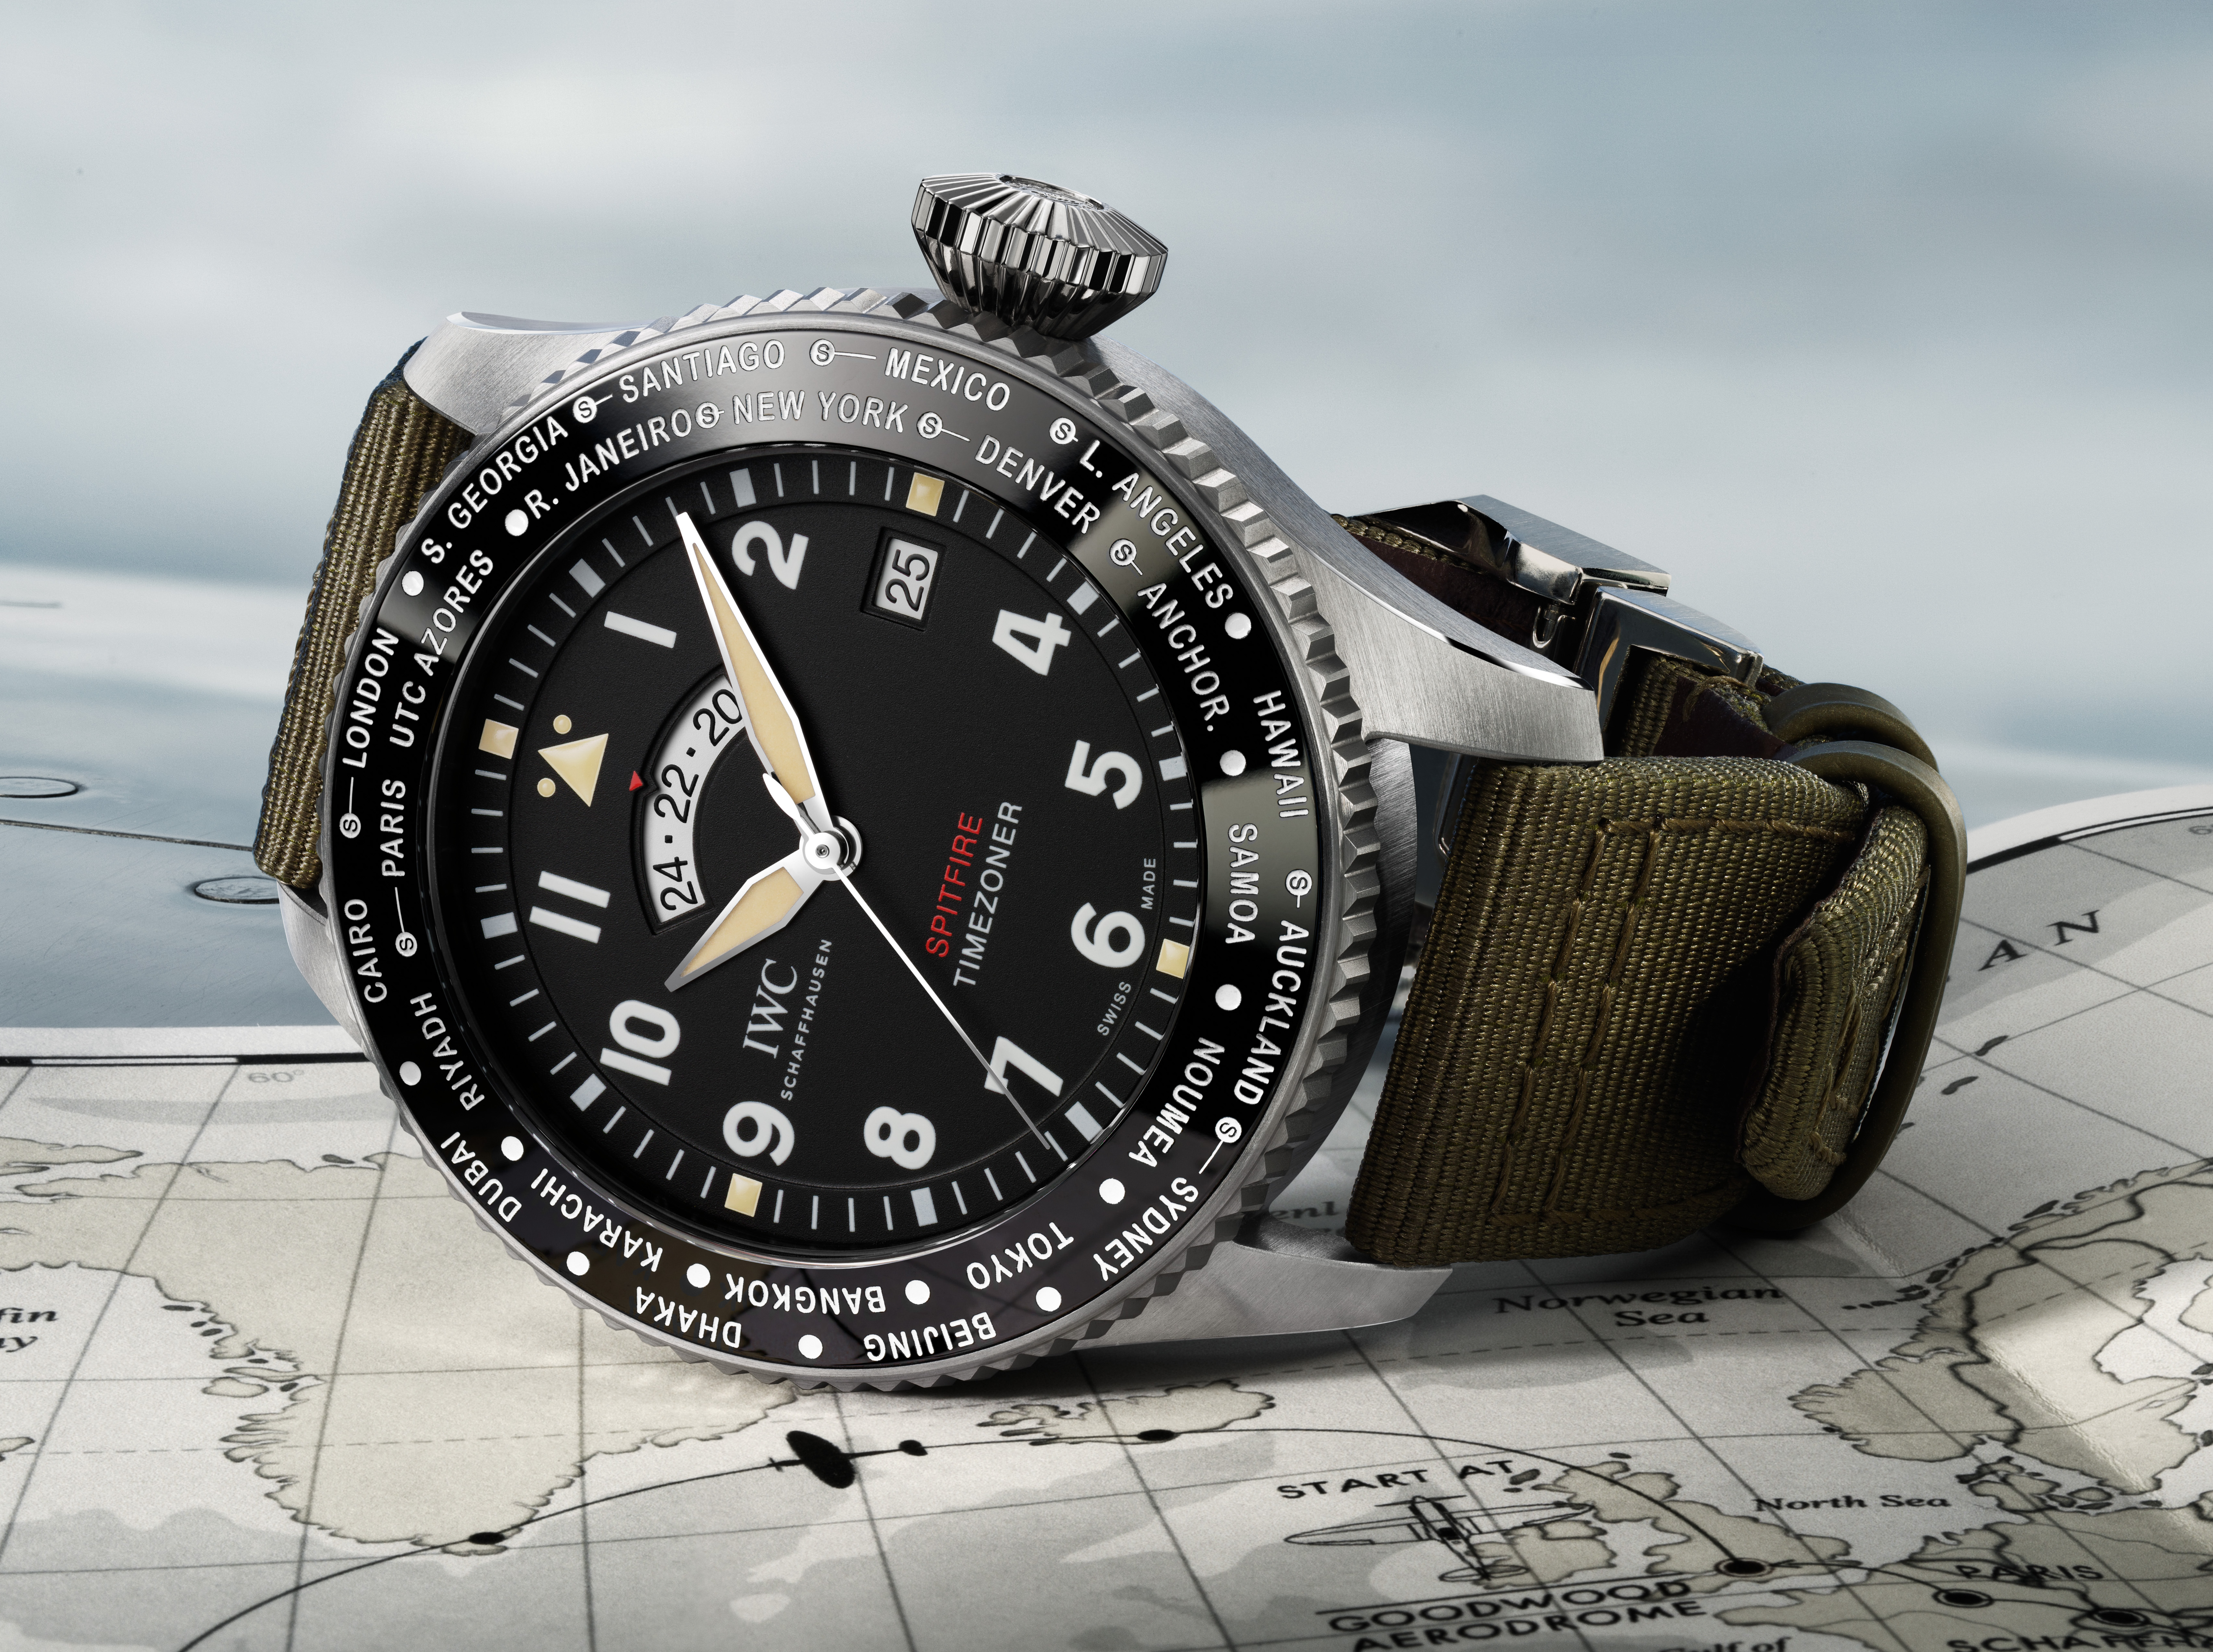 IWC Demonstrates Its Manufacturing Expertise With a New Spitfire Line